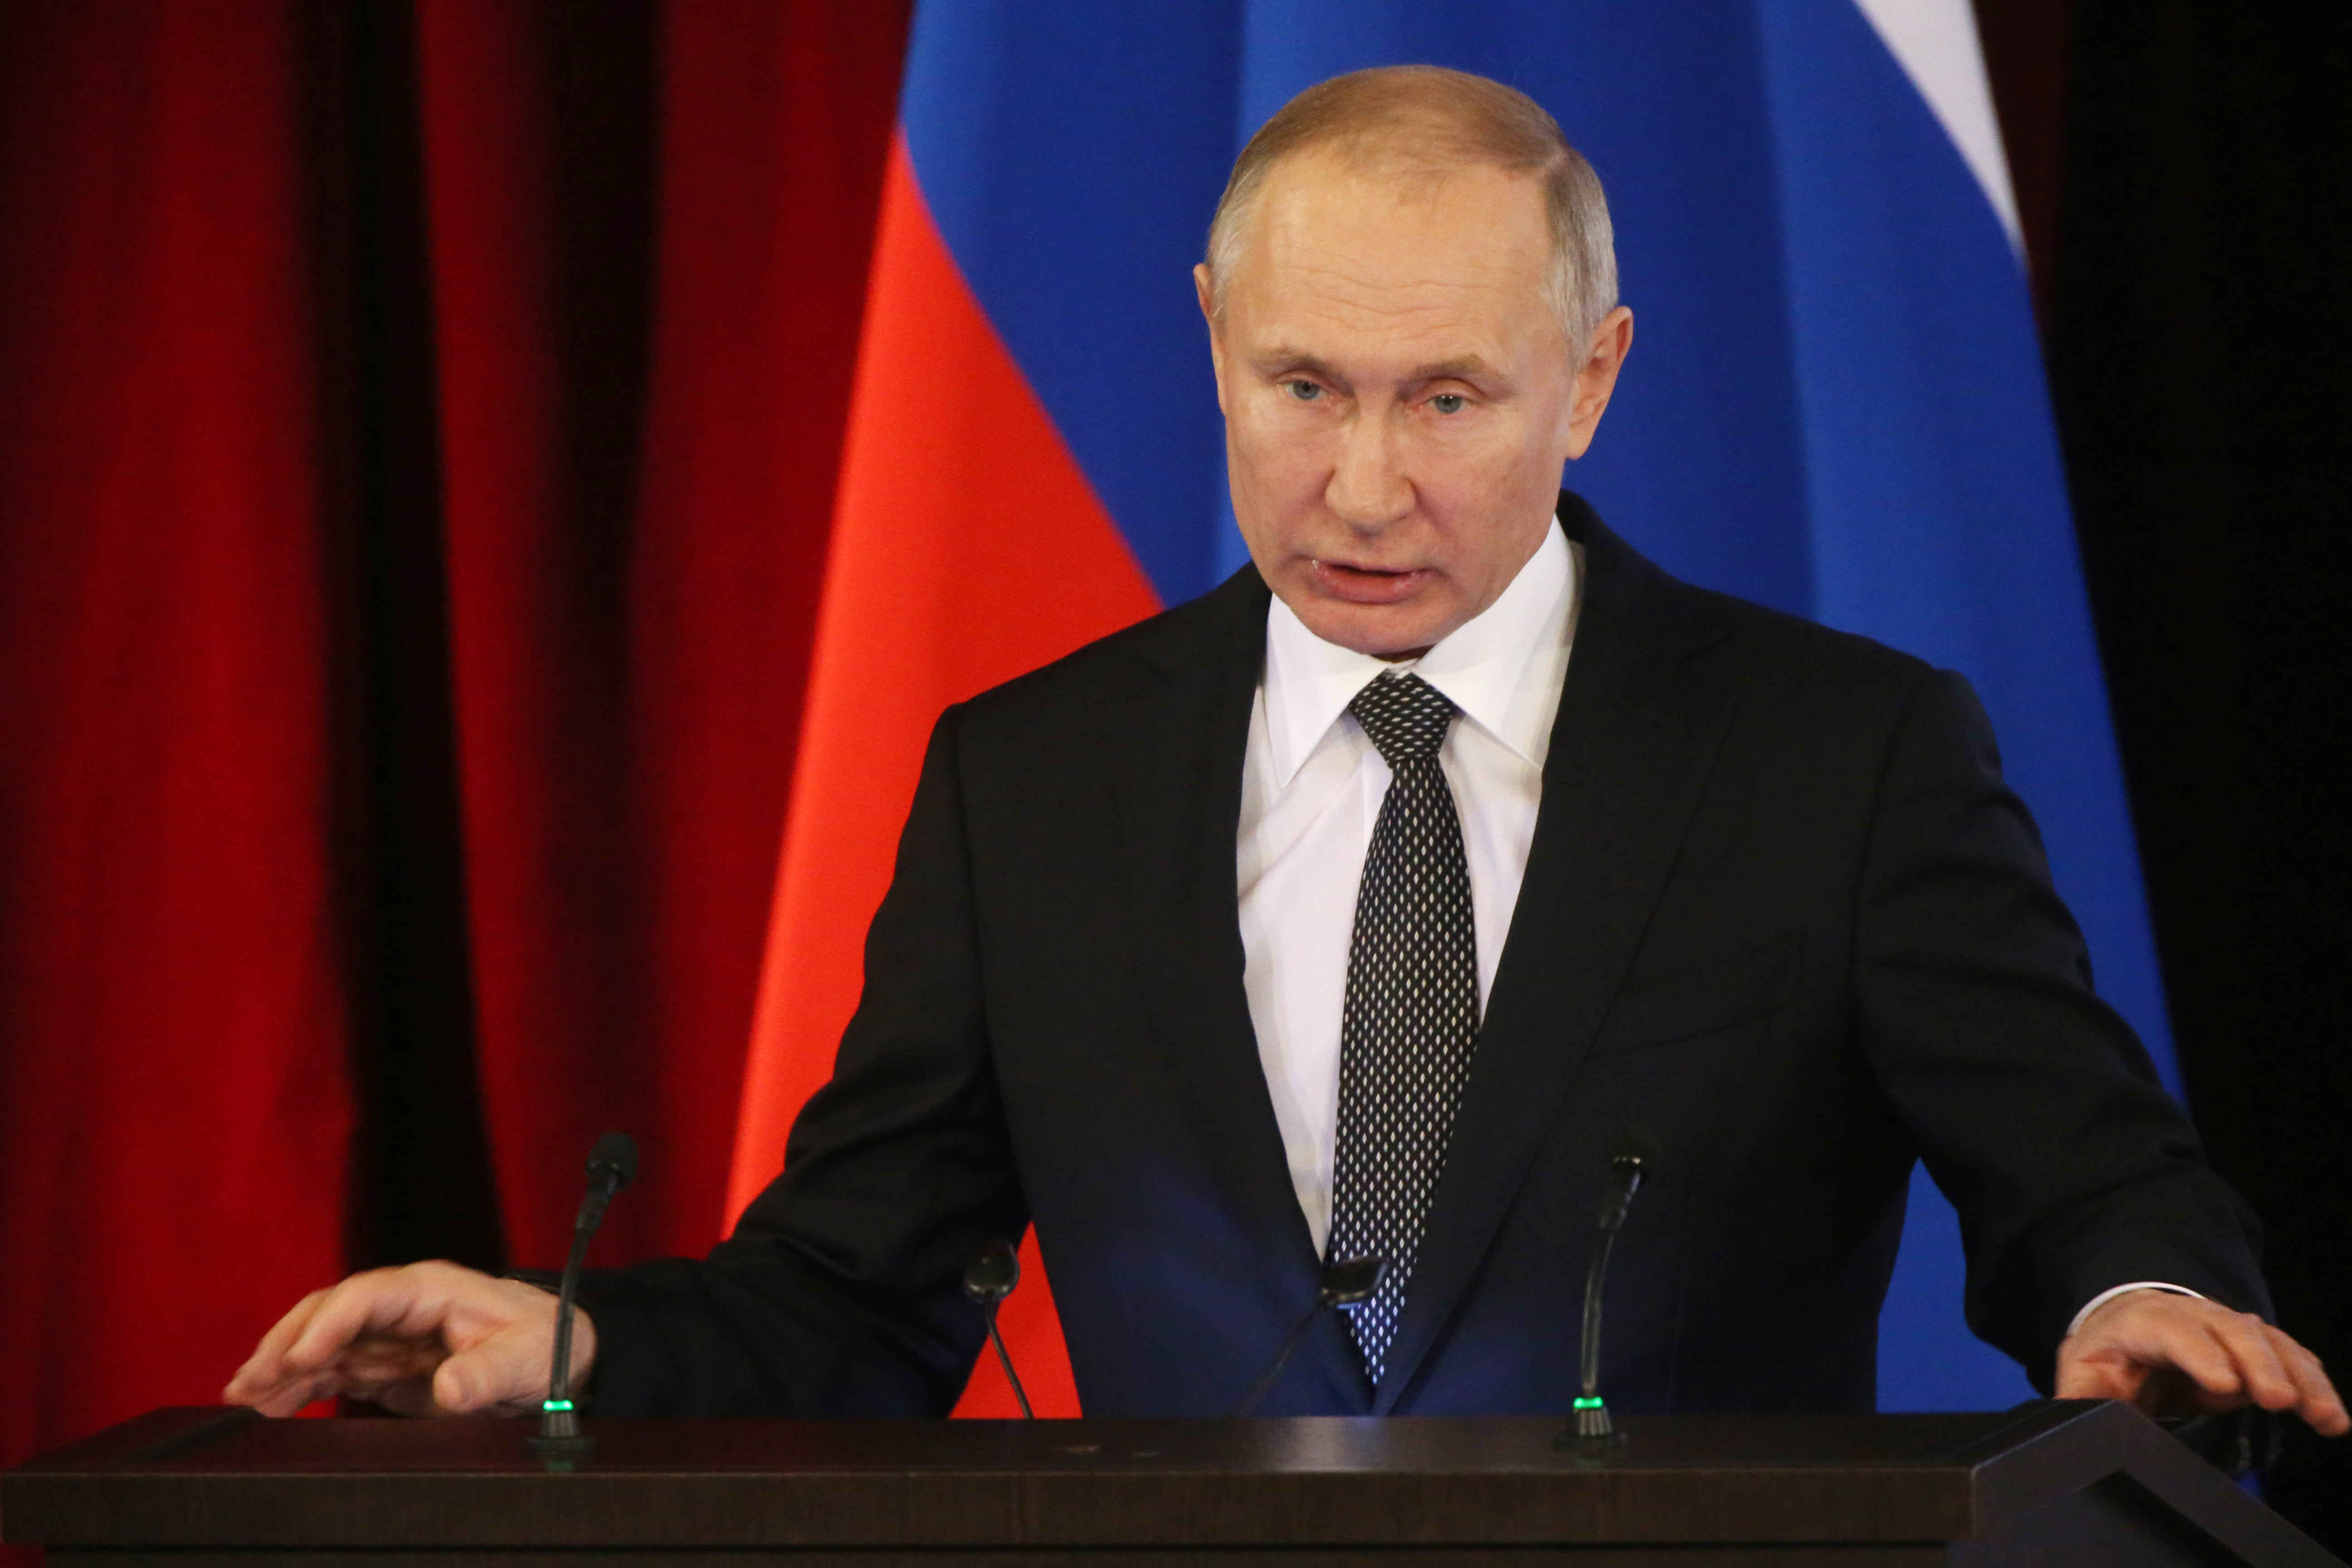 Putin warns against crossing Russia’s “red lines”, talks about the army